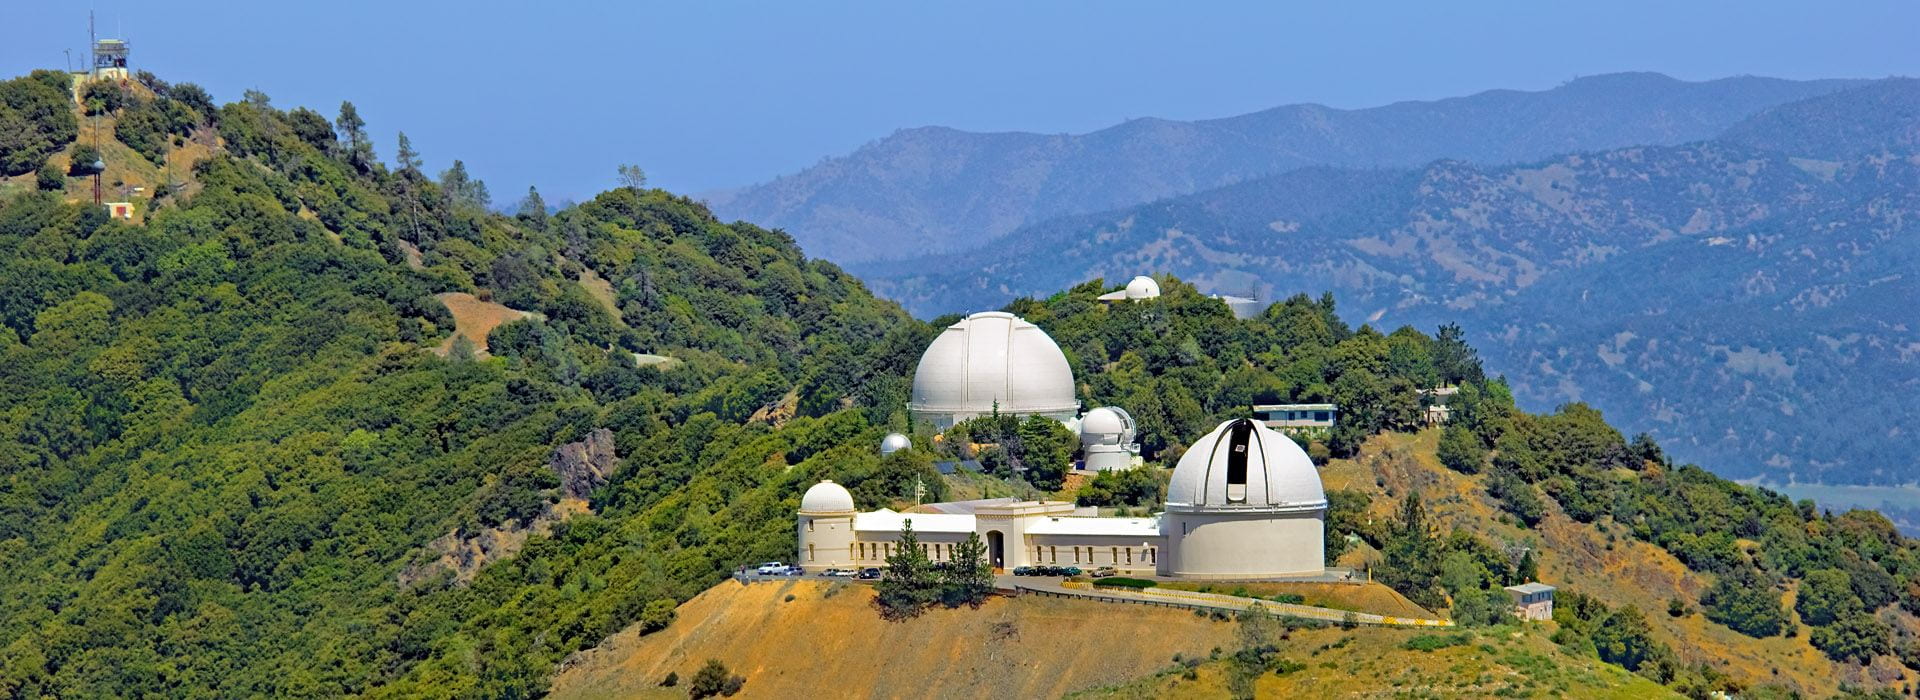 lick observatory tours